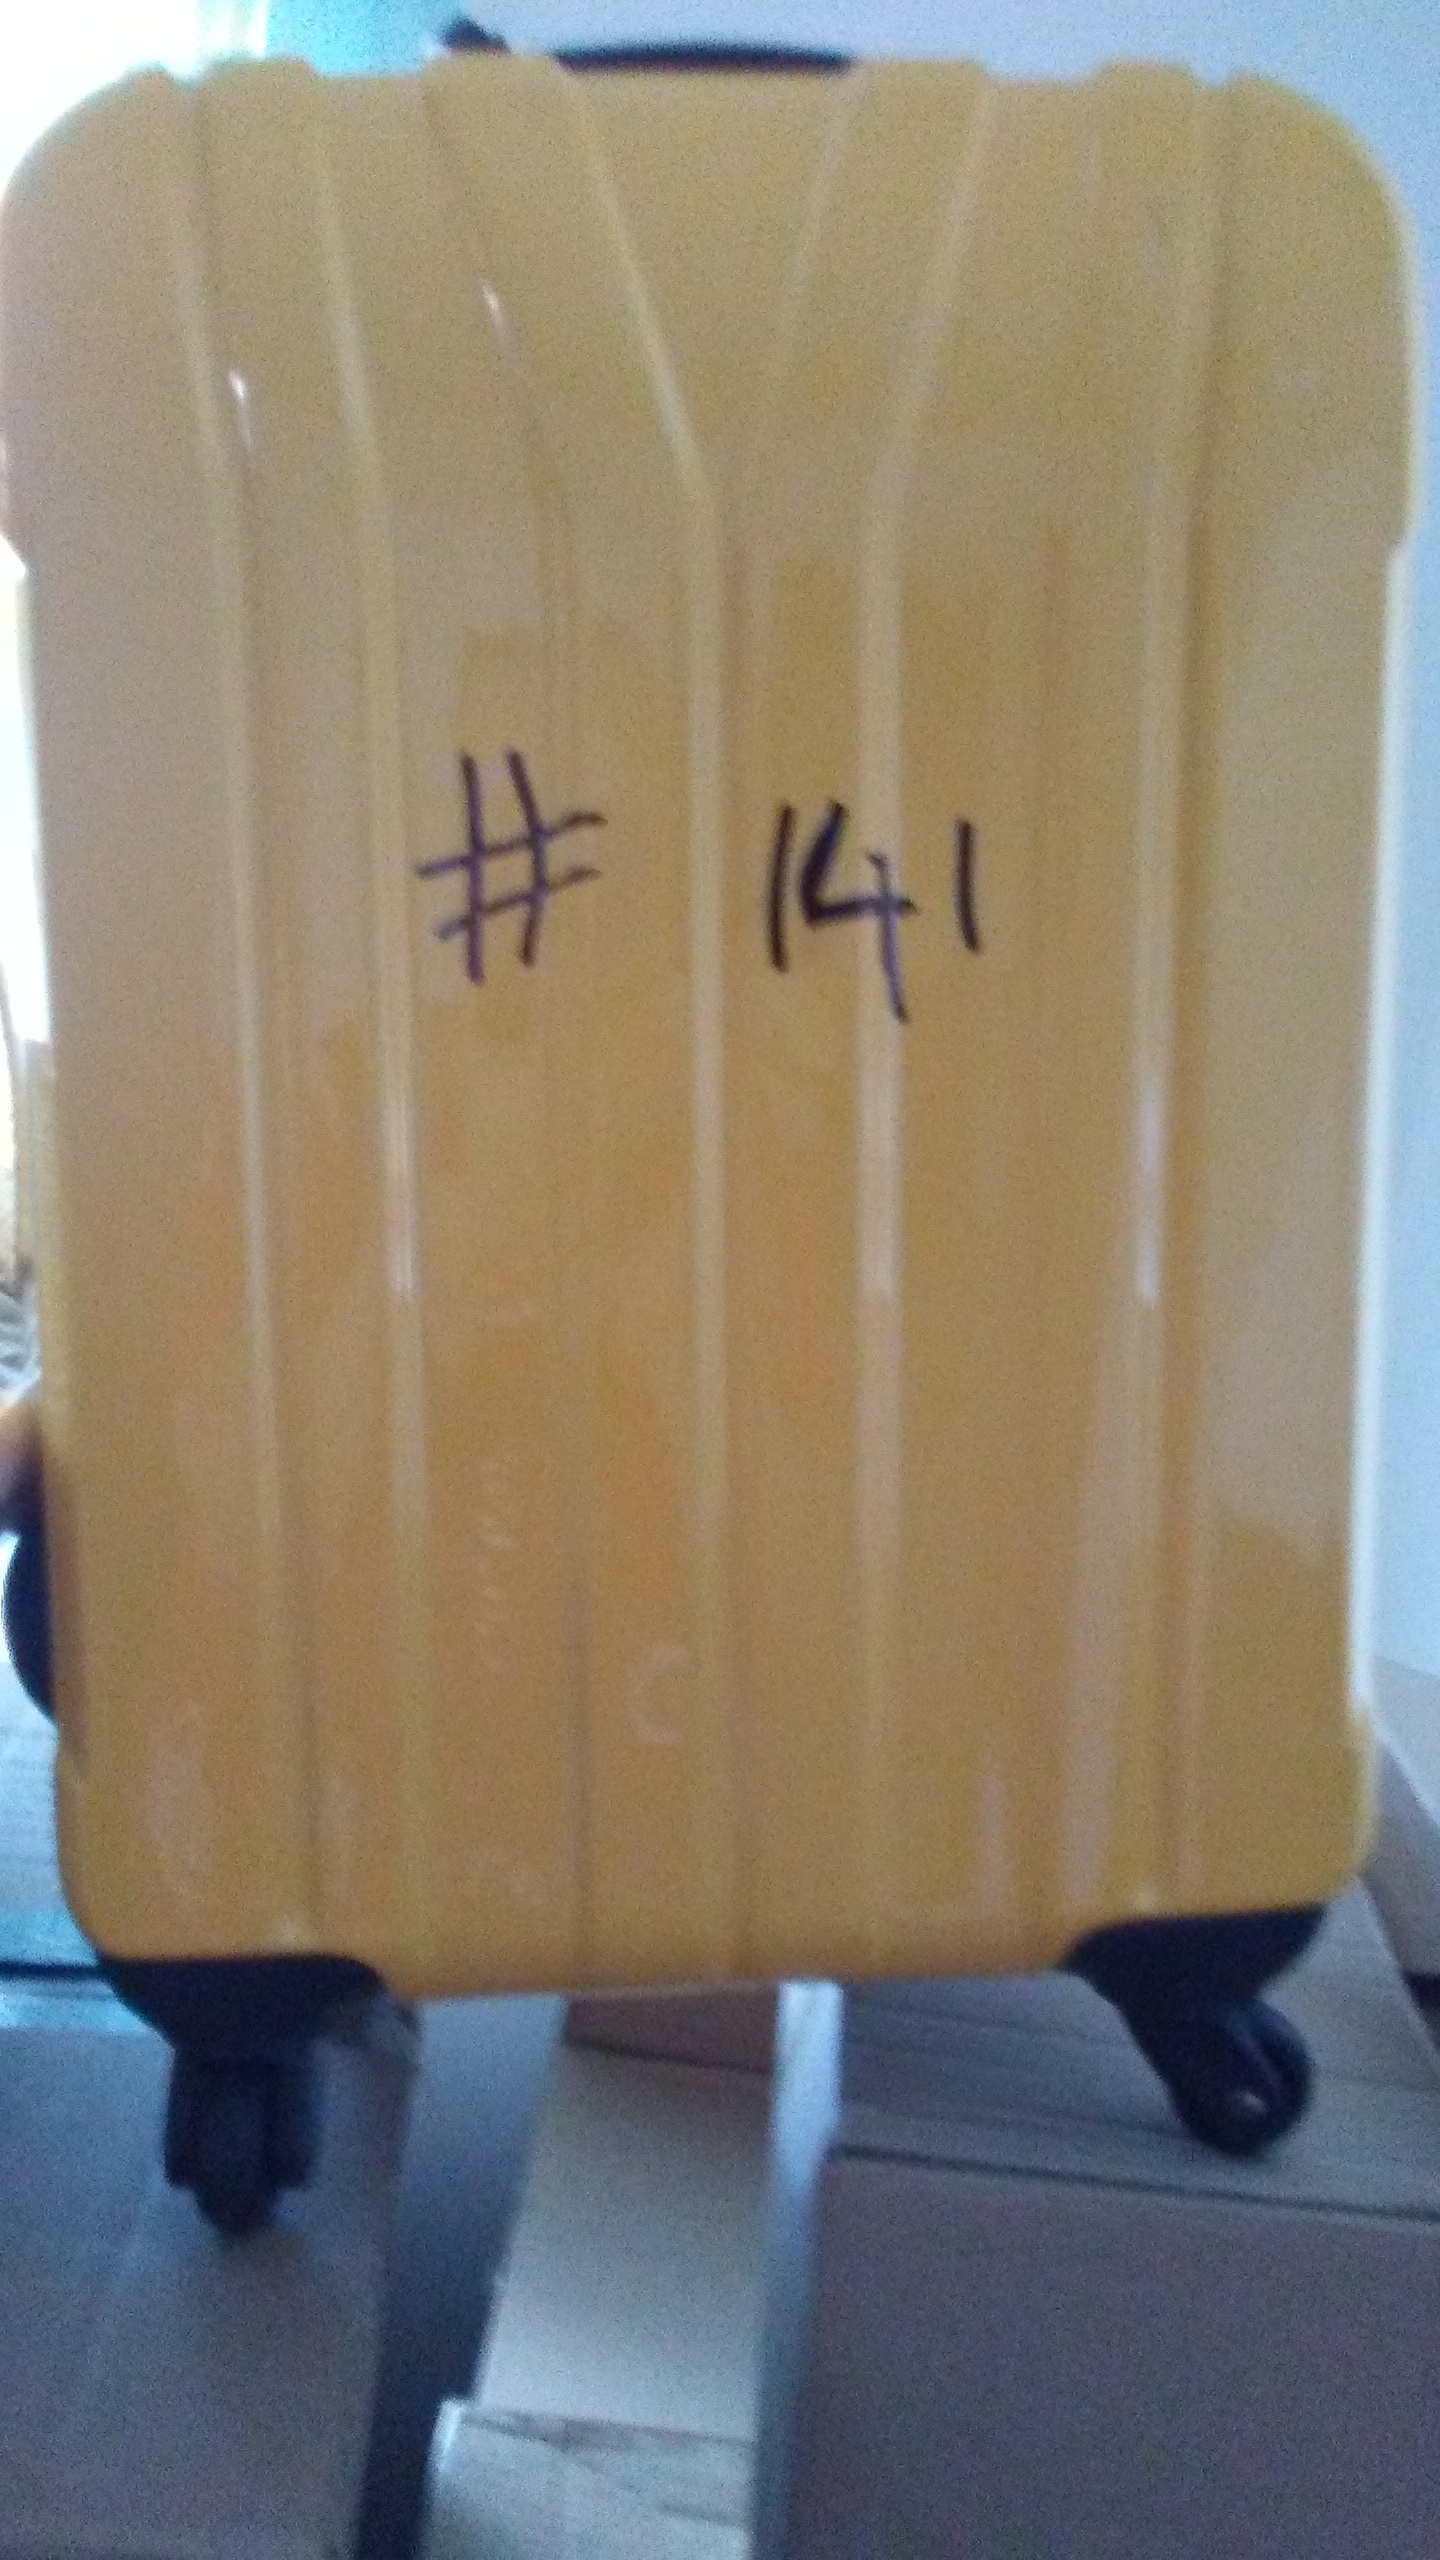 wrote on brand new brookstone suitcase